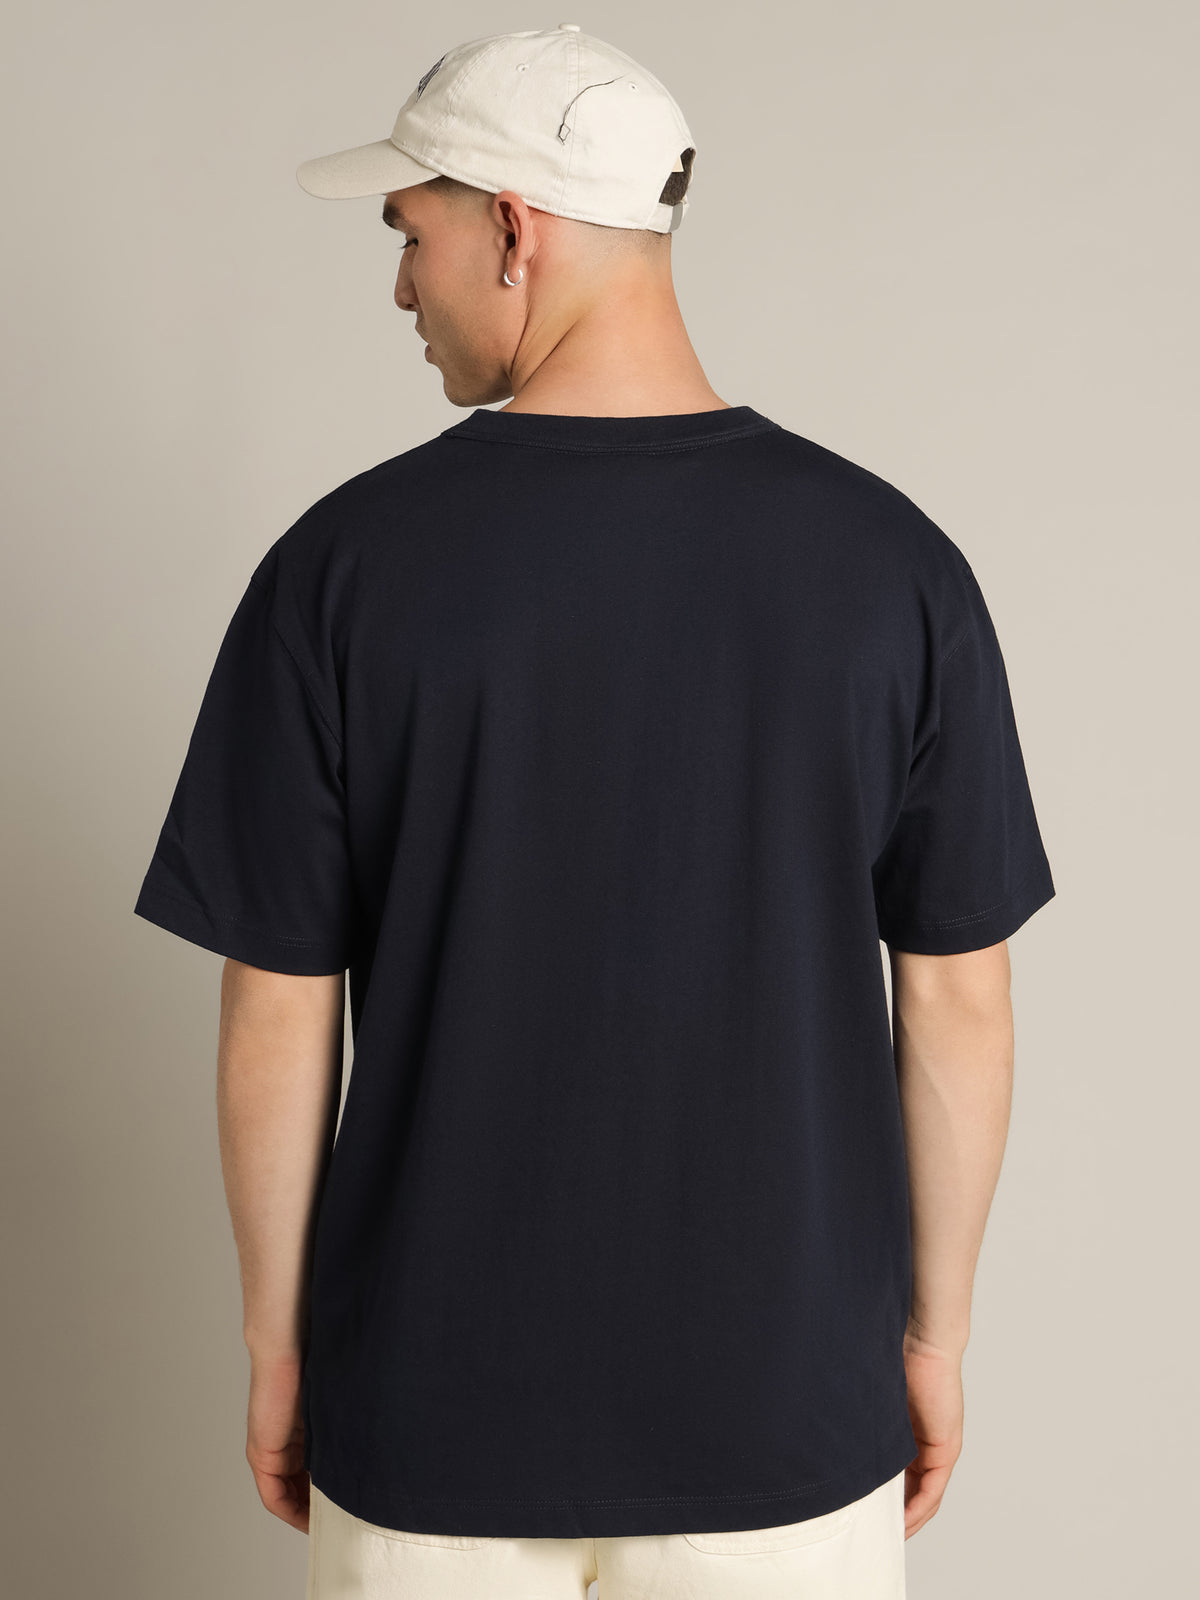 Archive Heritage T-Shirt in Navy